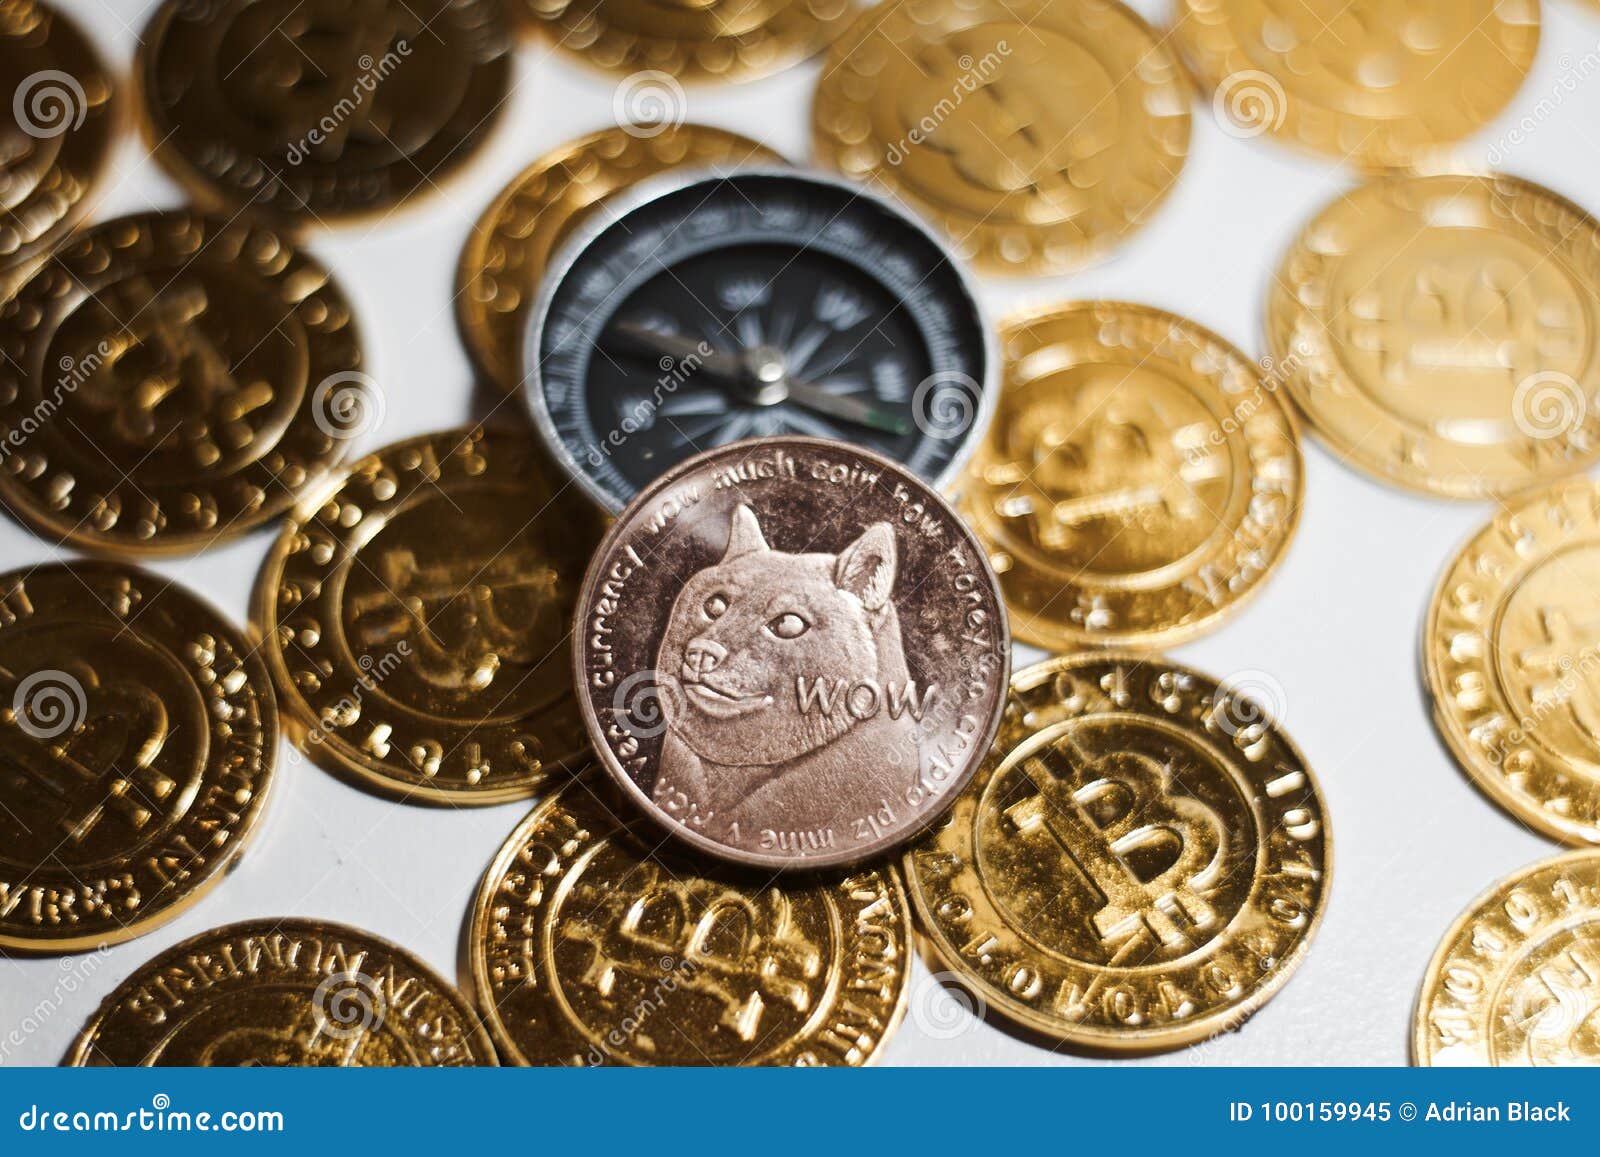 Dogecoin and compass stock image. Image of digital ...